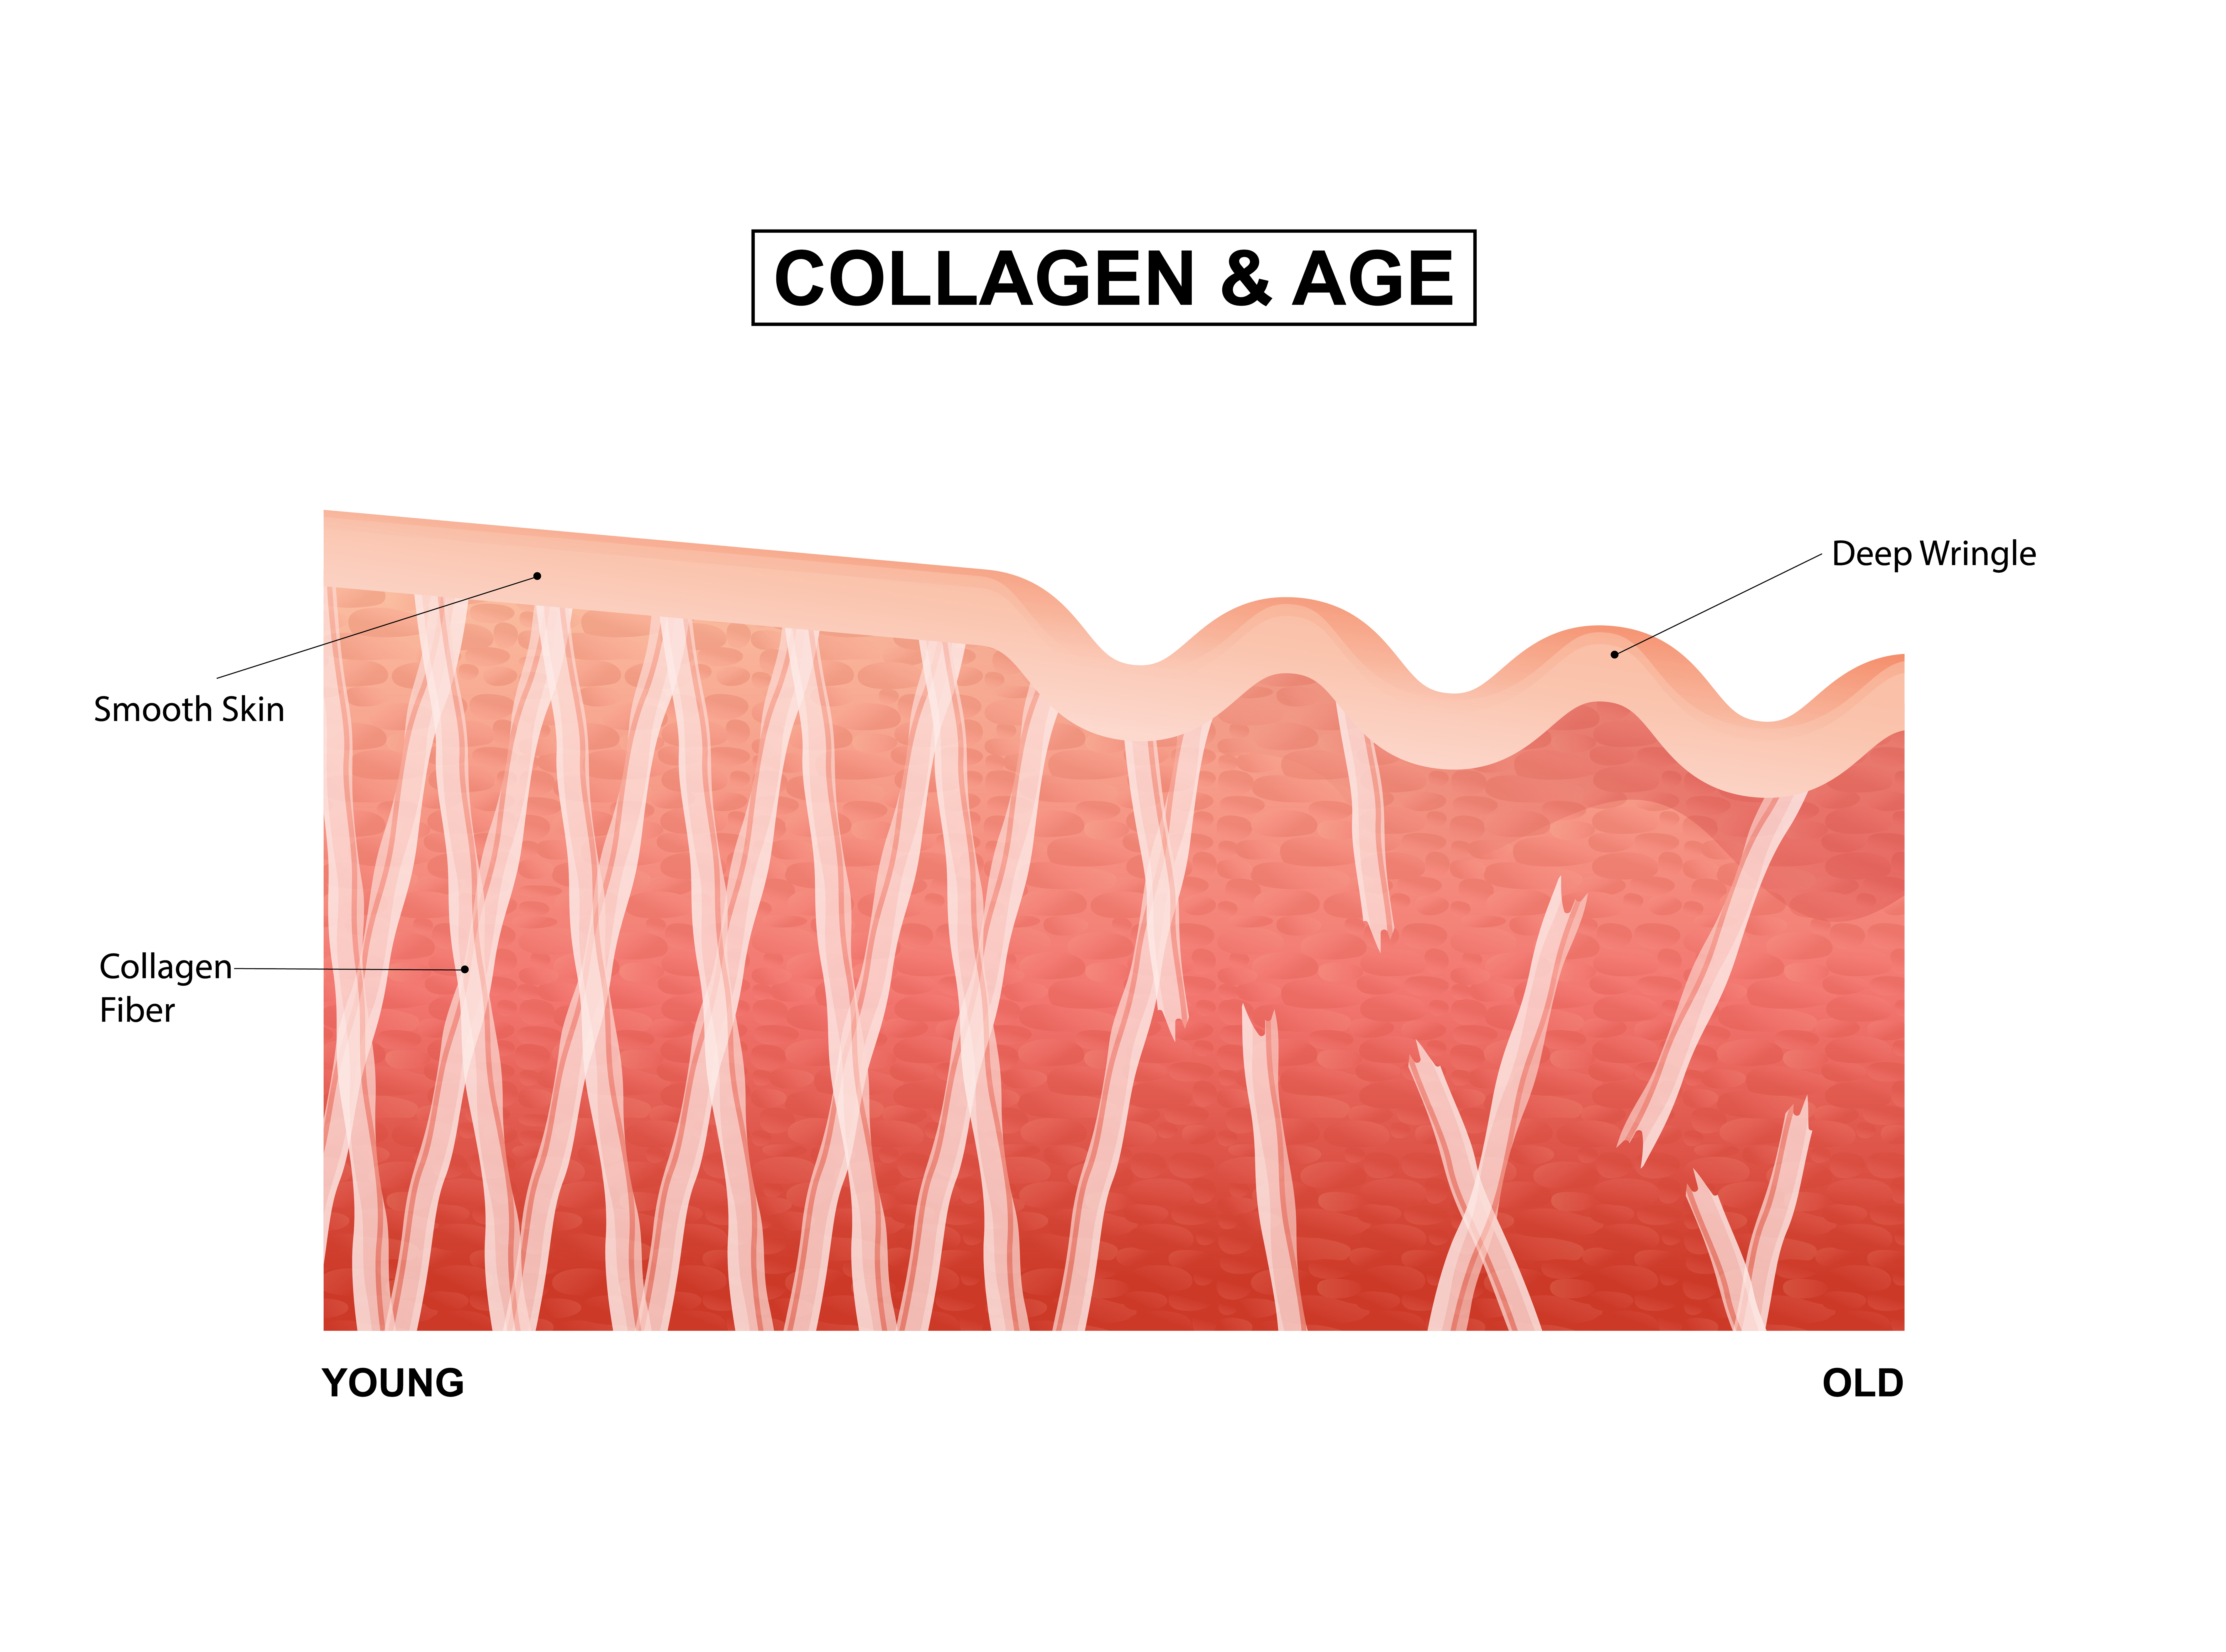 How collagen declines as you get older and during the menopause